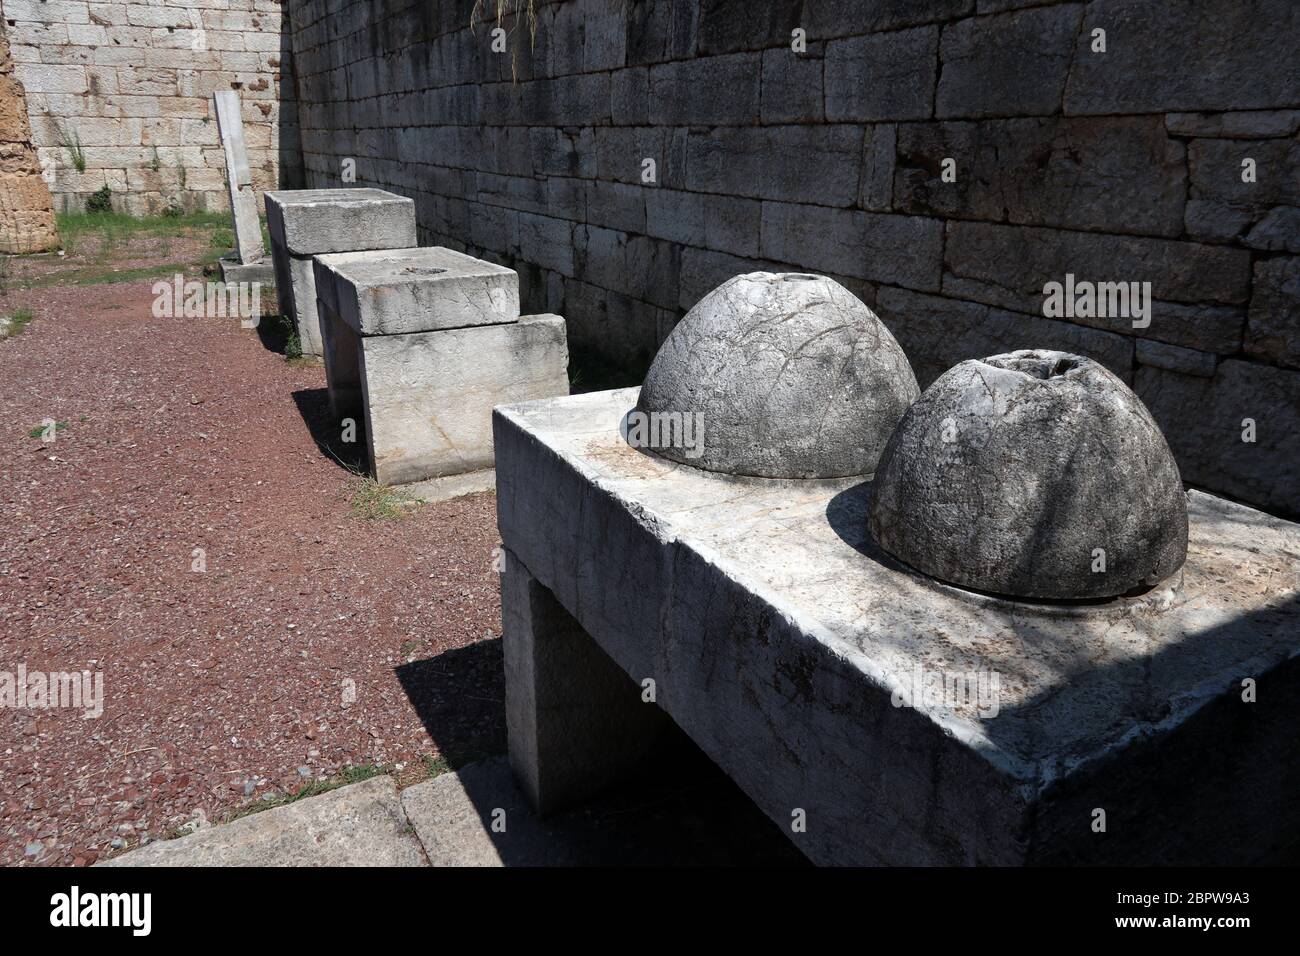 Stone measuring tables for testing capacity of containers used by grain and dried fruit merchants, Ancient Messini, Greece Stock Photo